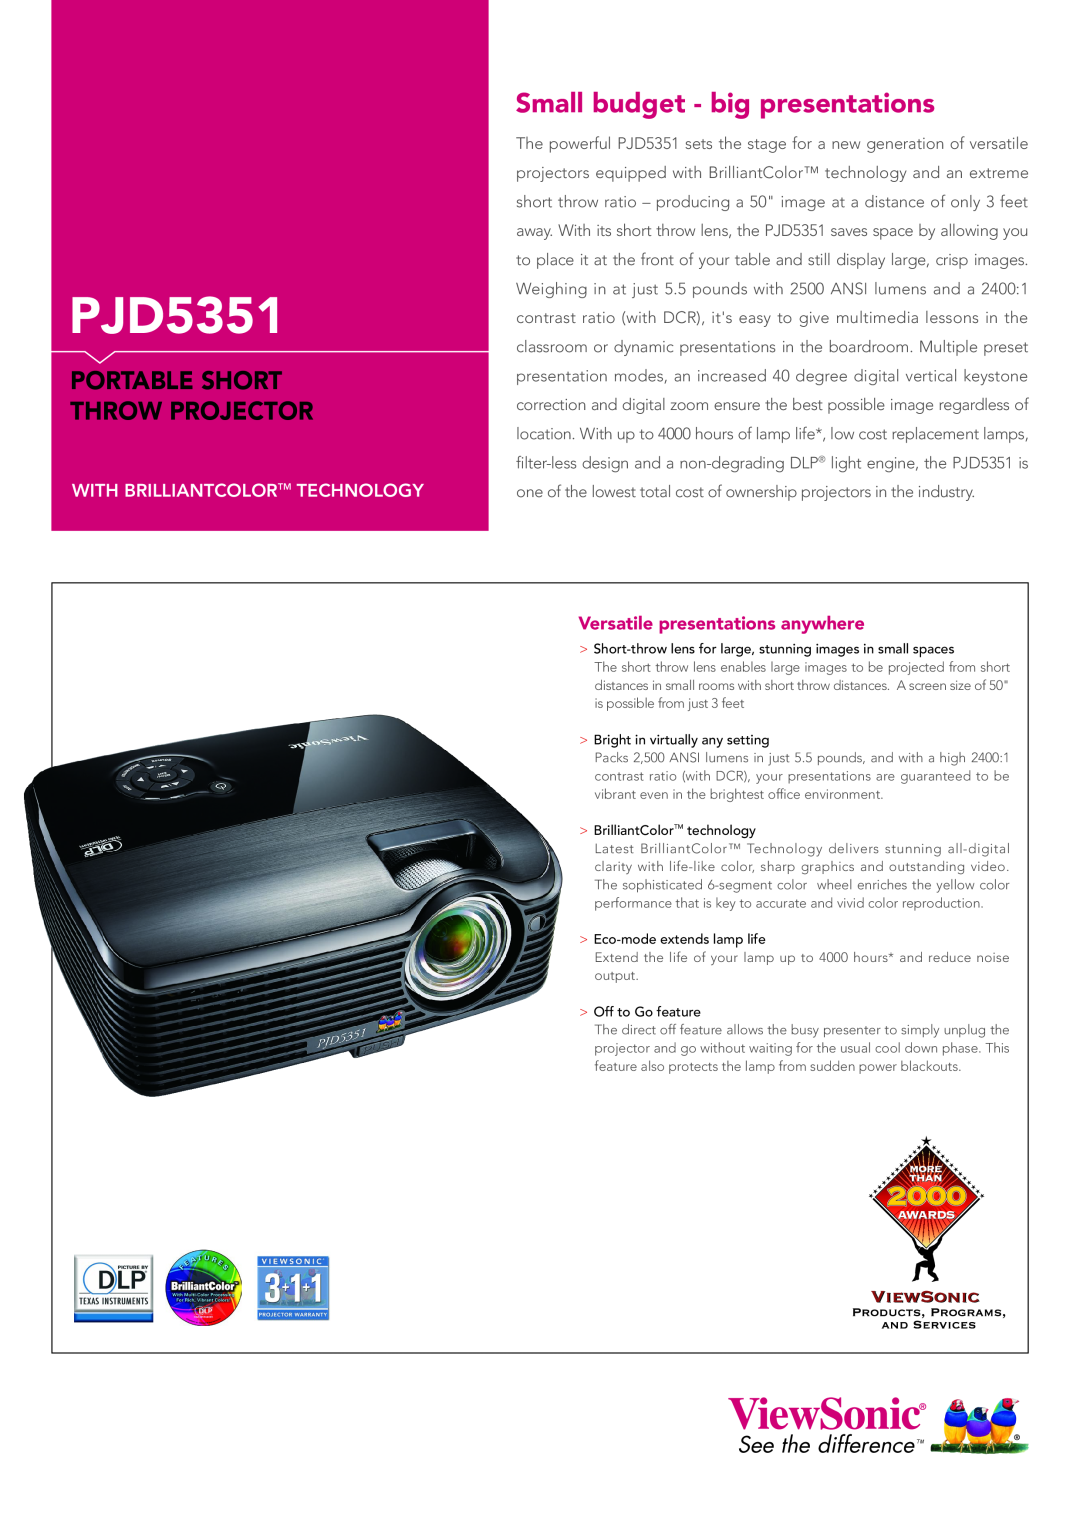 ViewSonic PJD5351 manual Small budget - big presentations, Portable Short Throw Projector, See the difference TM 